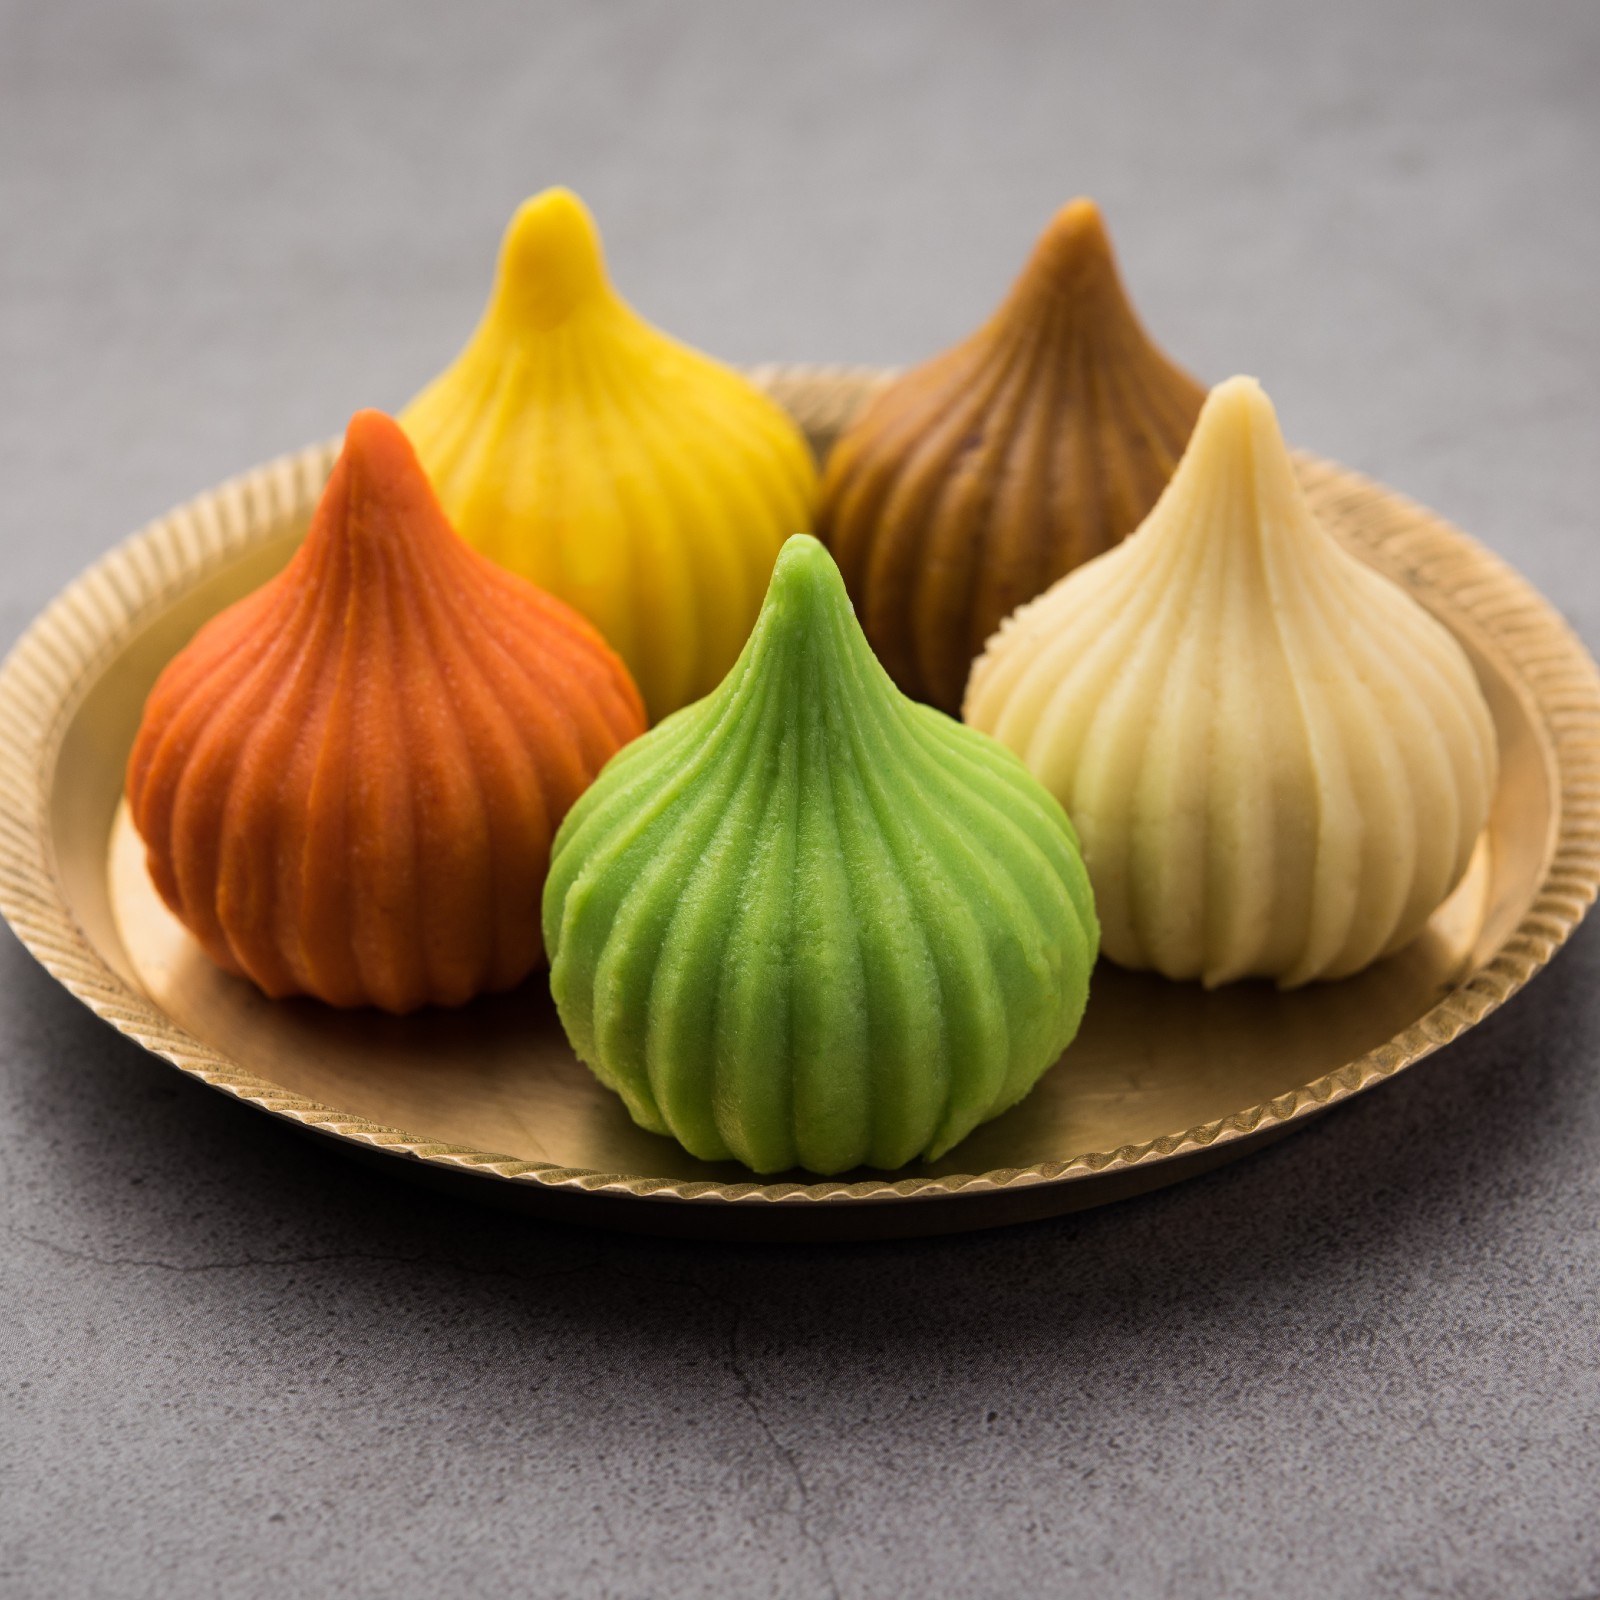 One of Lord Ganesha's favourite sweet is undoubtedly the humble modak. (Image: Shutterstock)